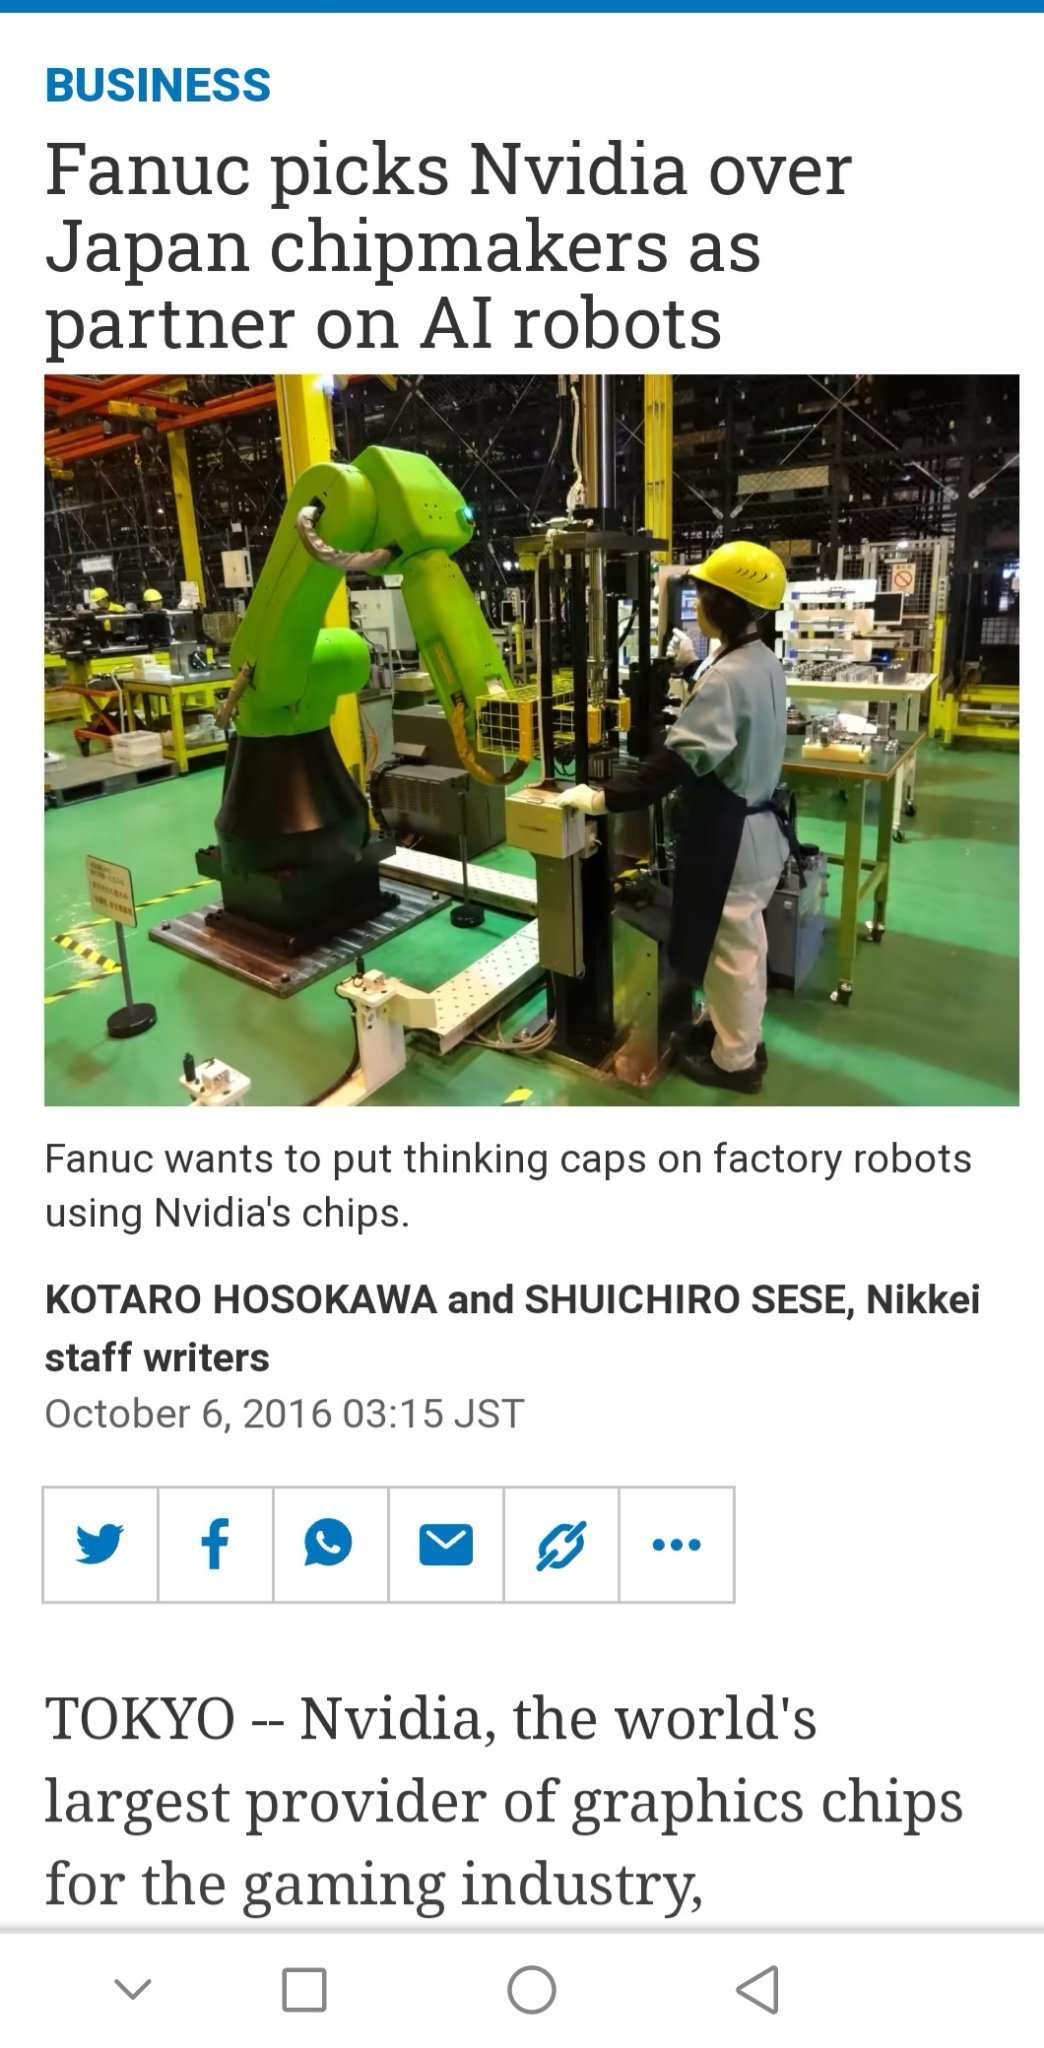 $Fanuc (ADR) (FANUY.US)$ the last mile of AI, physical installation to execute complete tasks n enhanced productivity. Anything short of physical execution  it ...